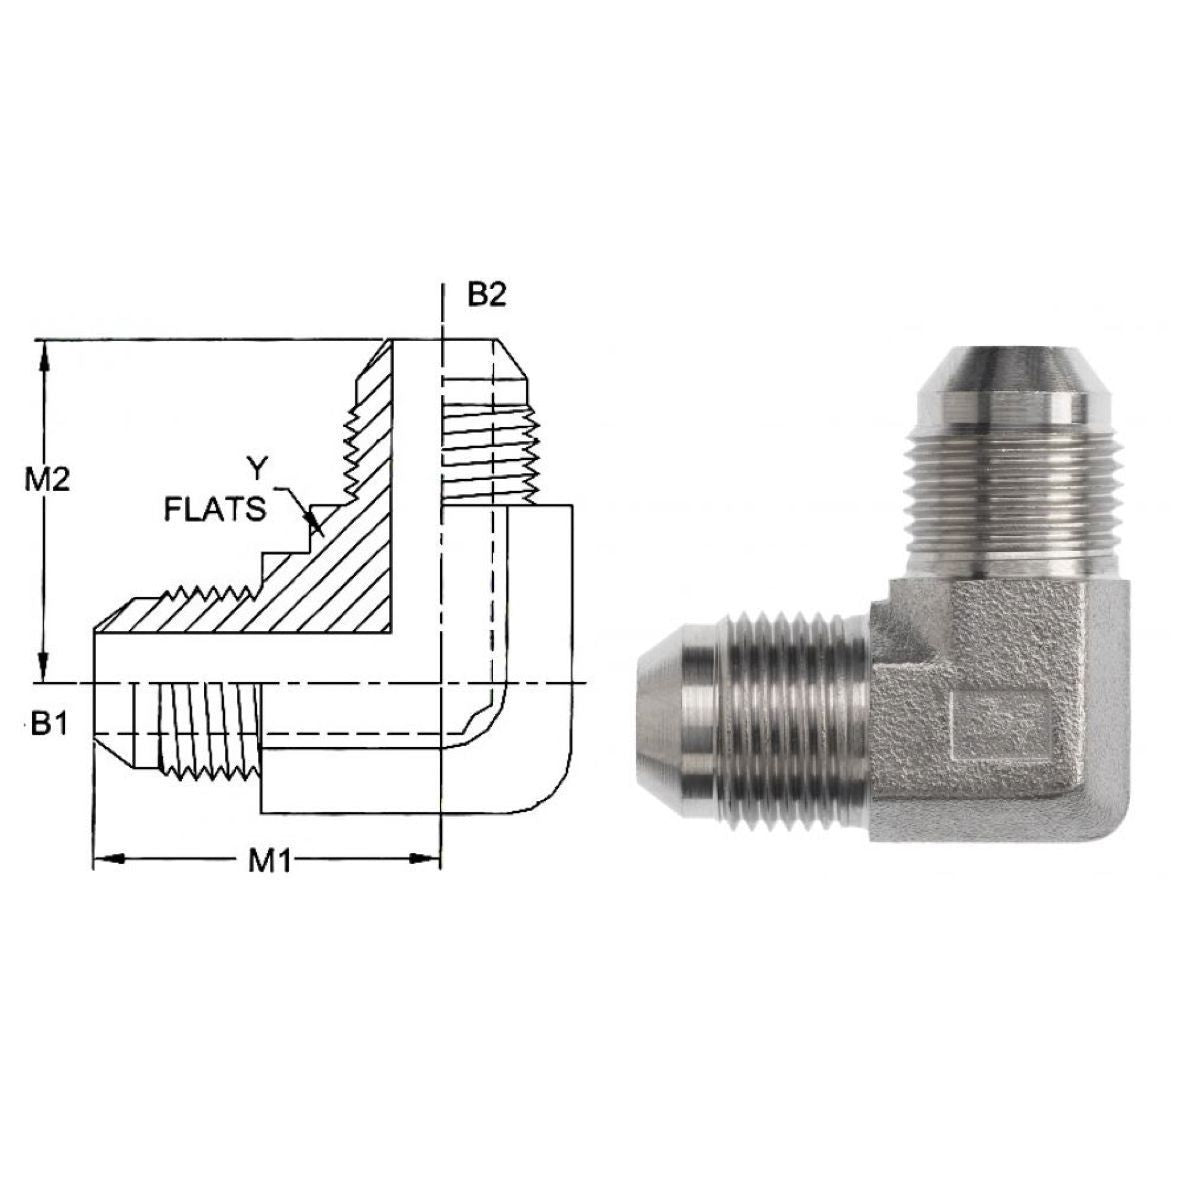 2500-06-06-SS : OneHydraulics 90-Degree Elbow, 0.375 (3/8) Male JIC x 0.375 (3/8) Male JIC, Stainless Steel, 7200psi